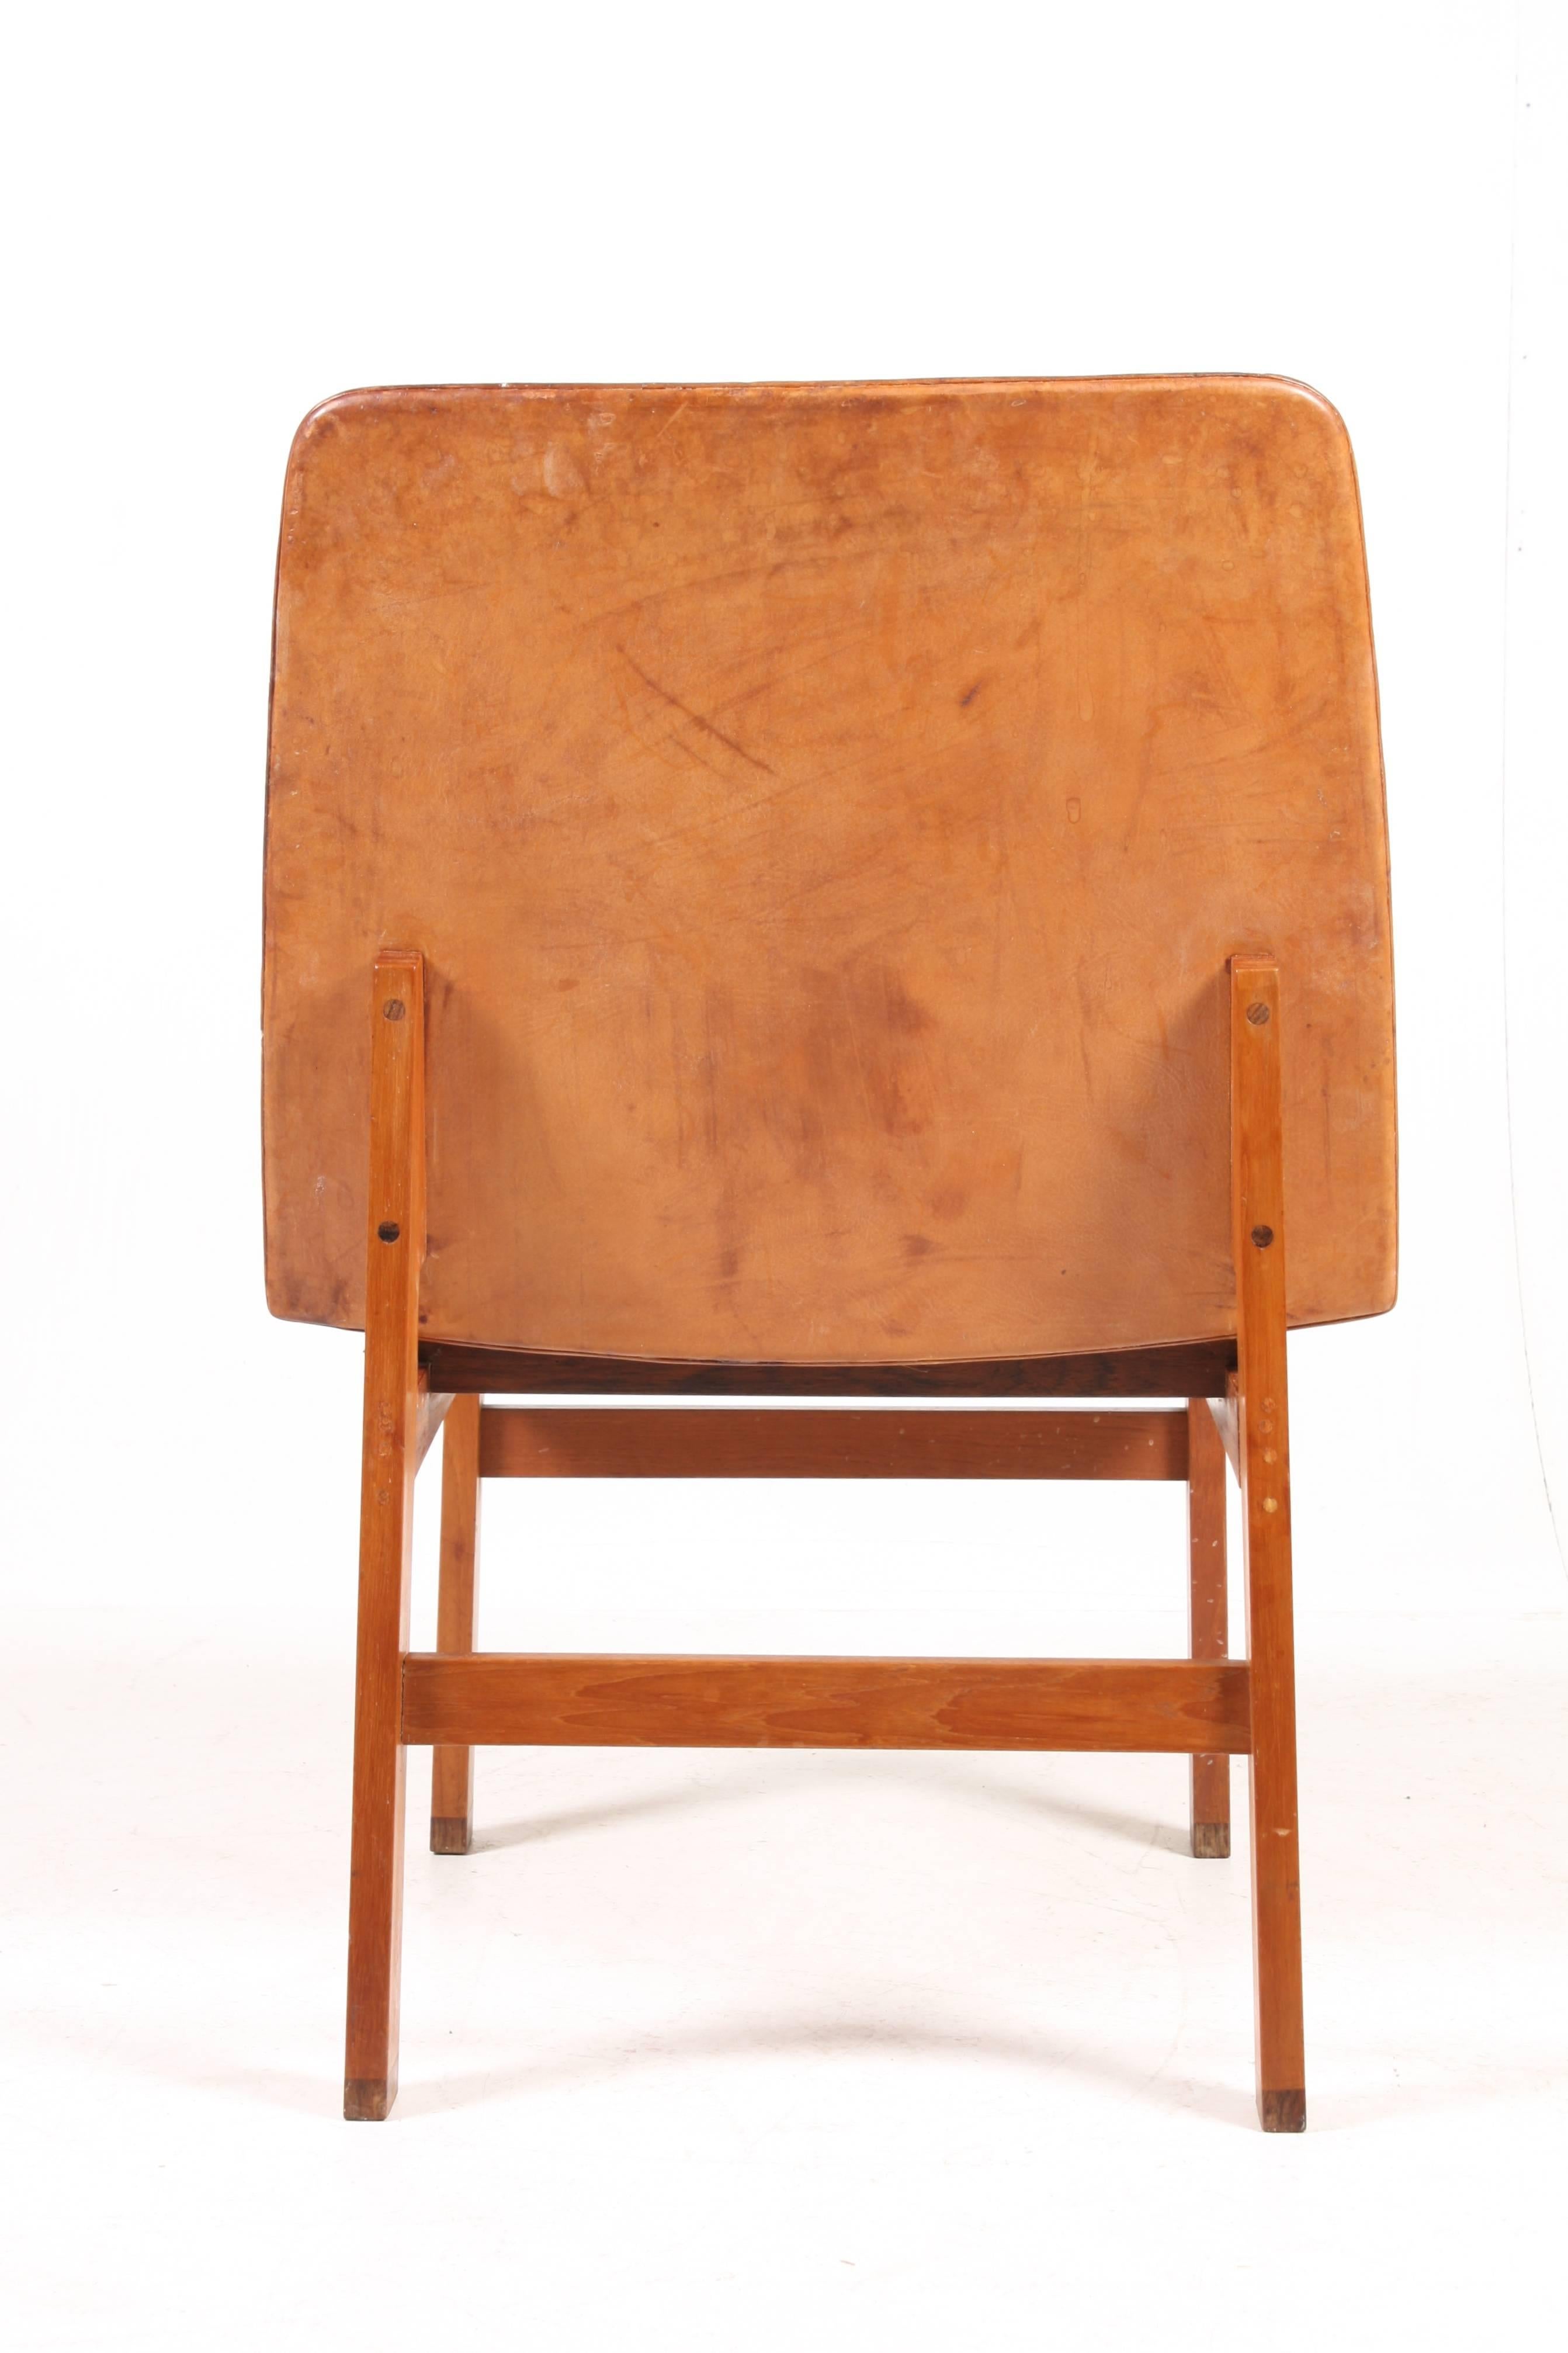 Teak Great Looking Chair in Patinated Leather